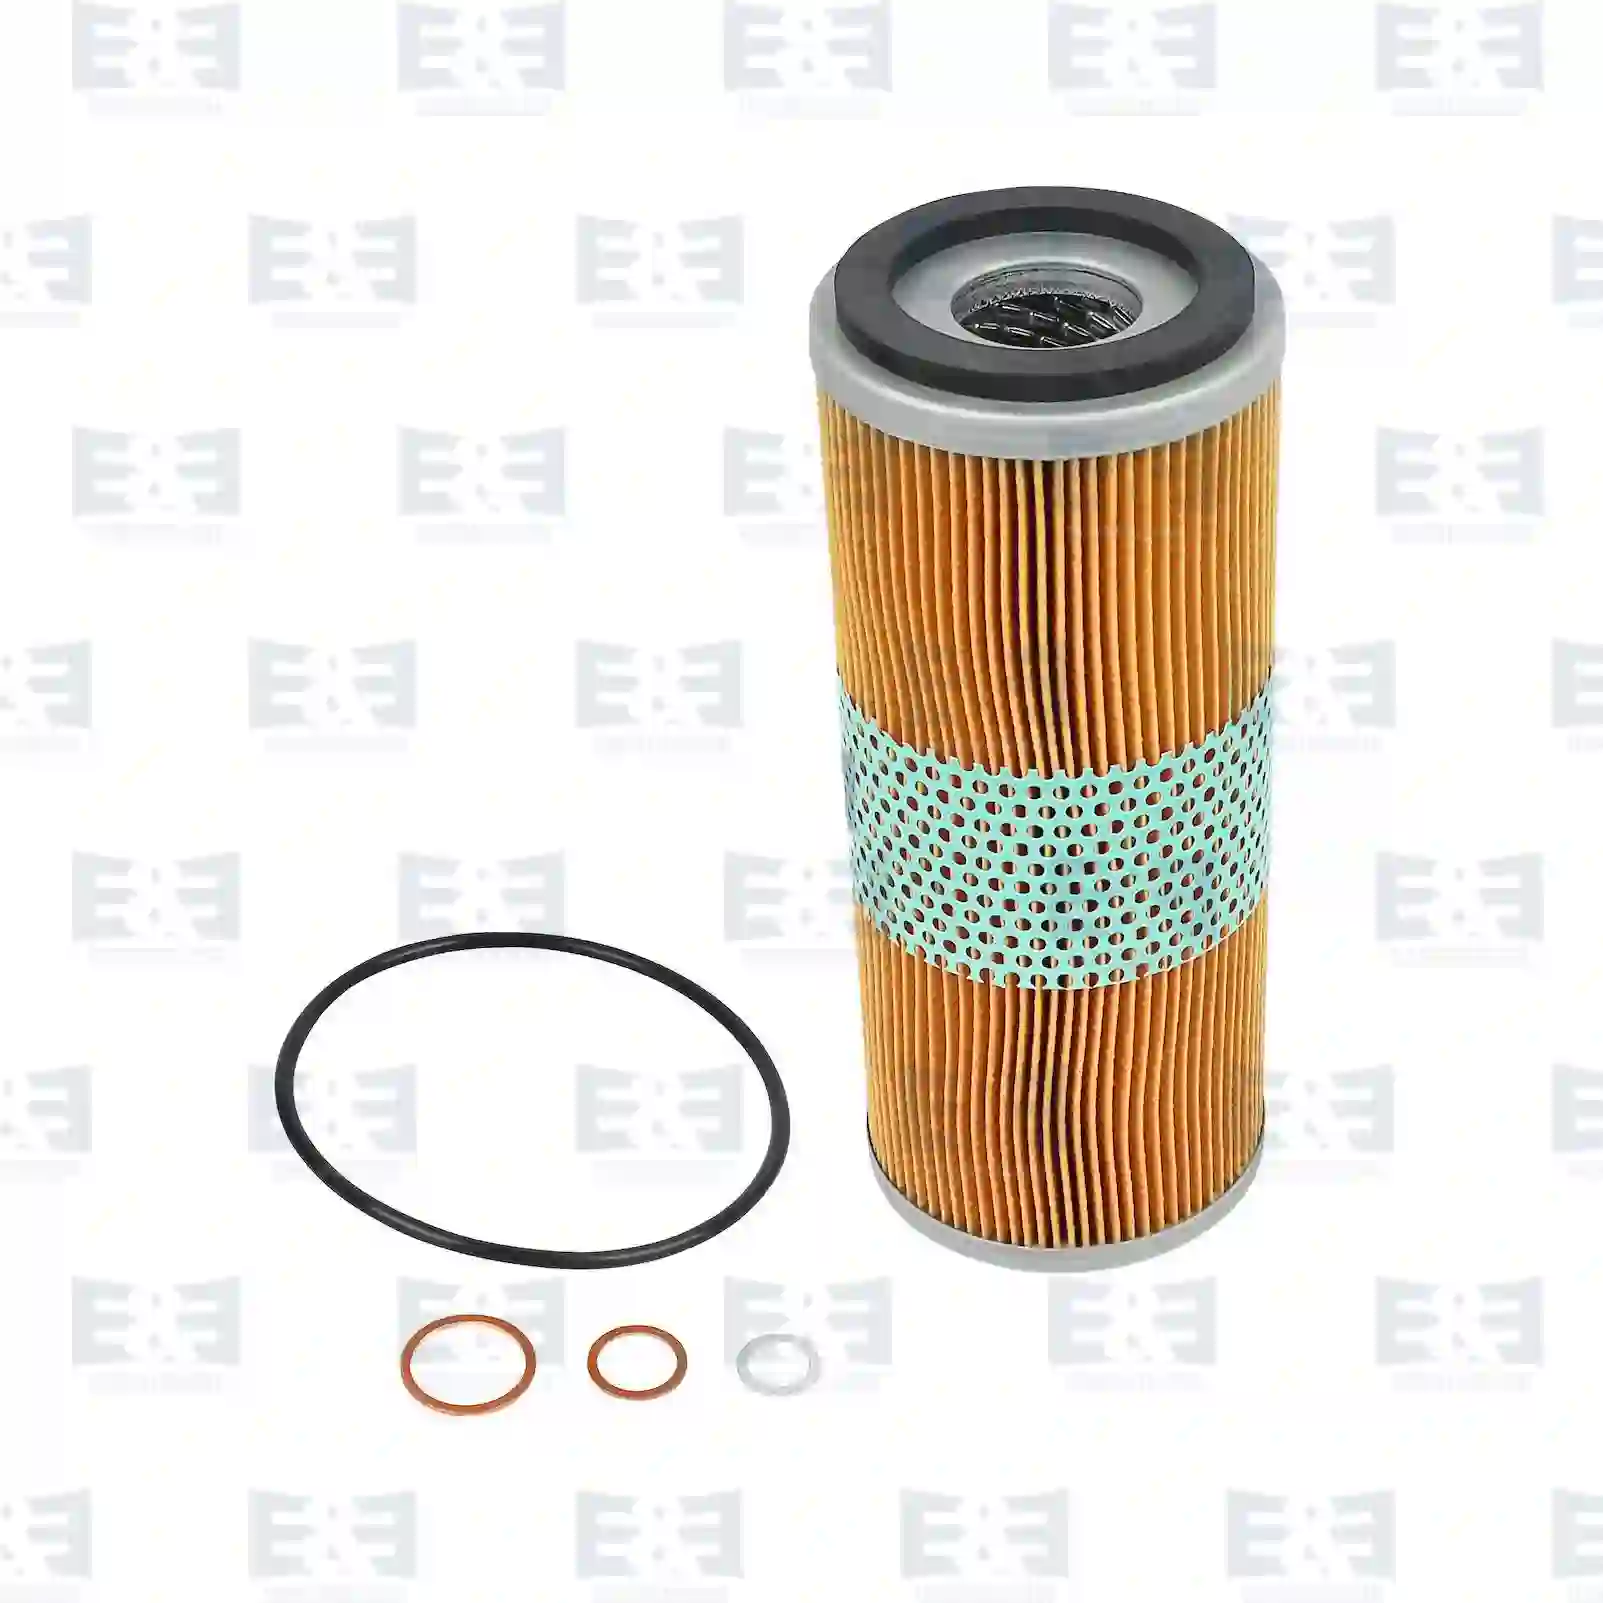 Oil Filter Oil filter insert, EE No 2E2200487 ,  oem no:7984862, 40001416, 0011840825, 0011843325, 0011845625, 3451840025, 3455867290, 3551800009, 355180000967, 3551800109, 3551800409, 0011847225, 609H1905 E&E Truck Spare Parts | Truck Spare Parts, Auotomotive Spare Parts